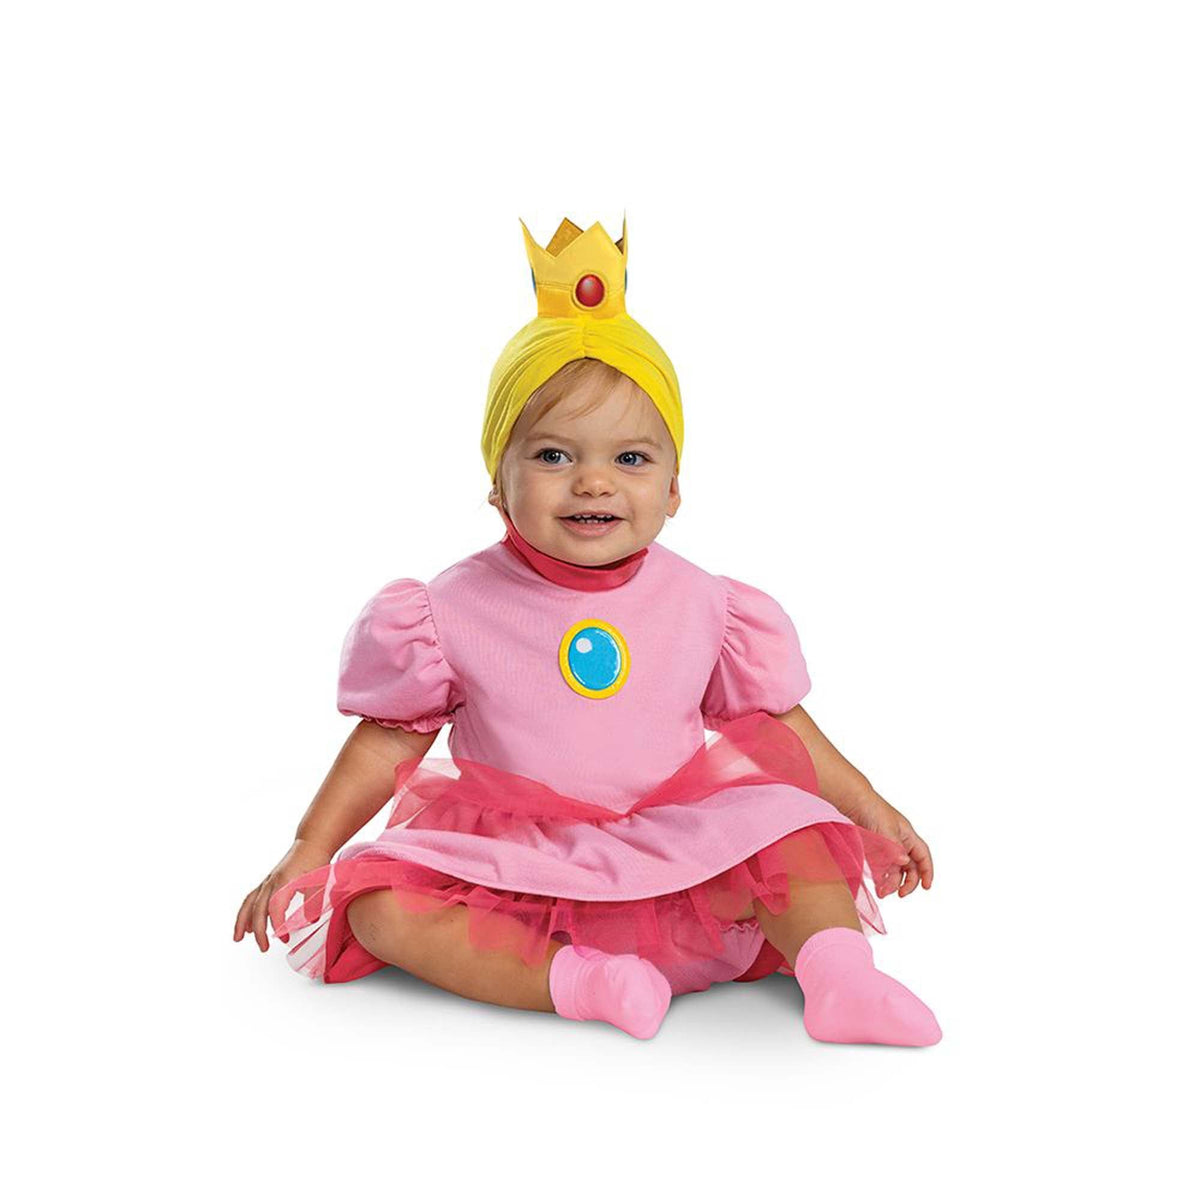 DISGUISE (TOY-SPORT) Costumes Nintendo Super Mario Bros Princess Peach Dress Costume for Babies, Pink Dress and Bloomers